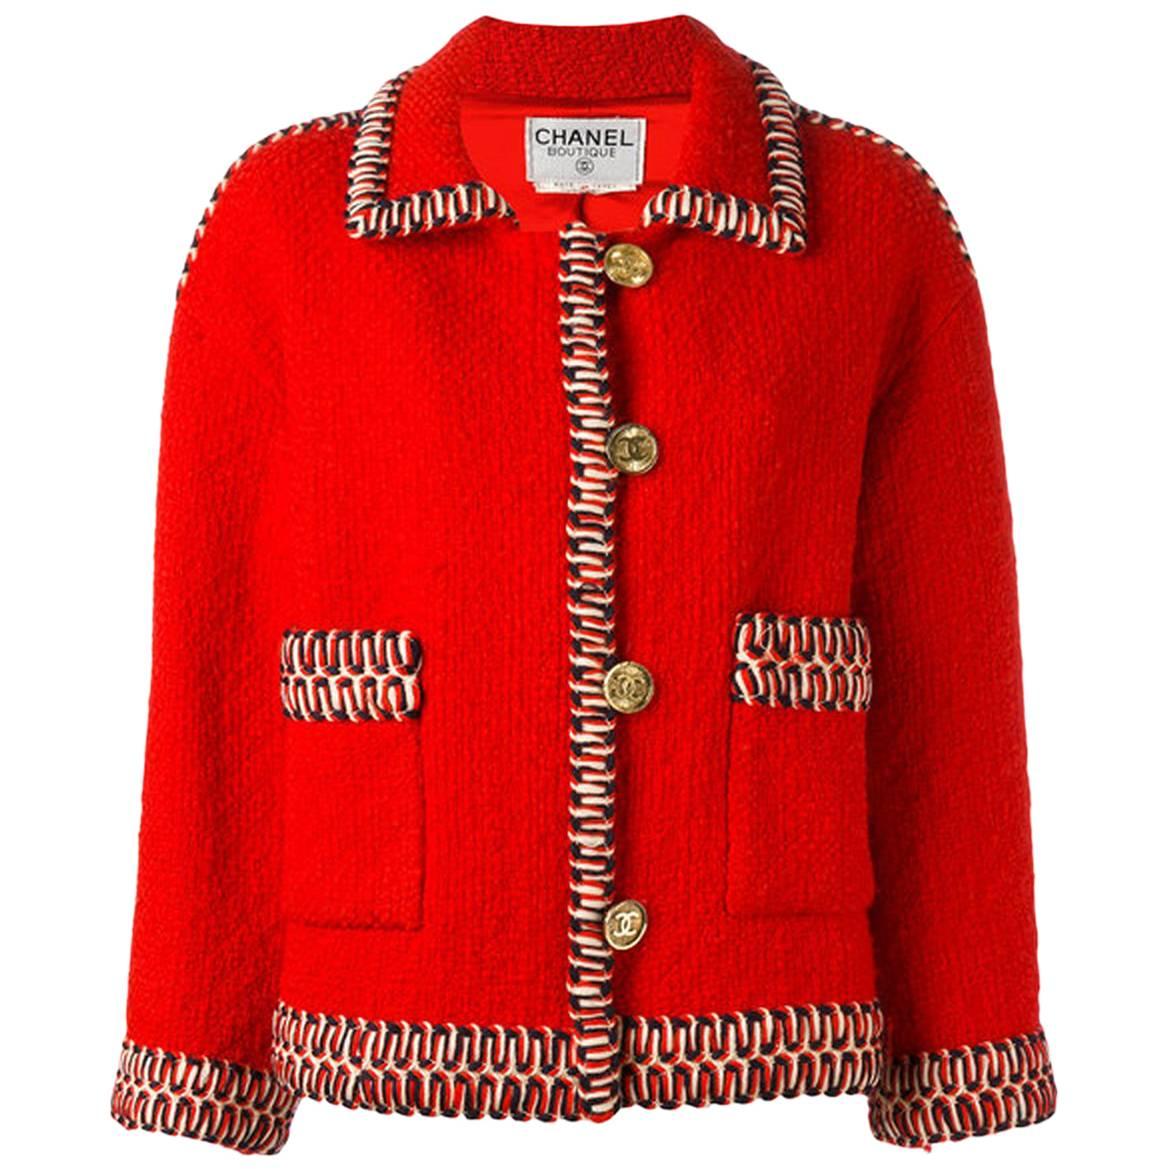 Chanel Red Wool Boucle Jacket